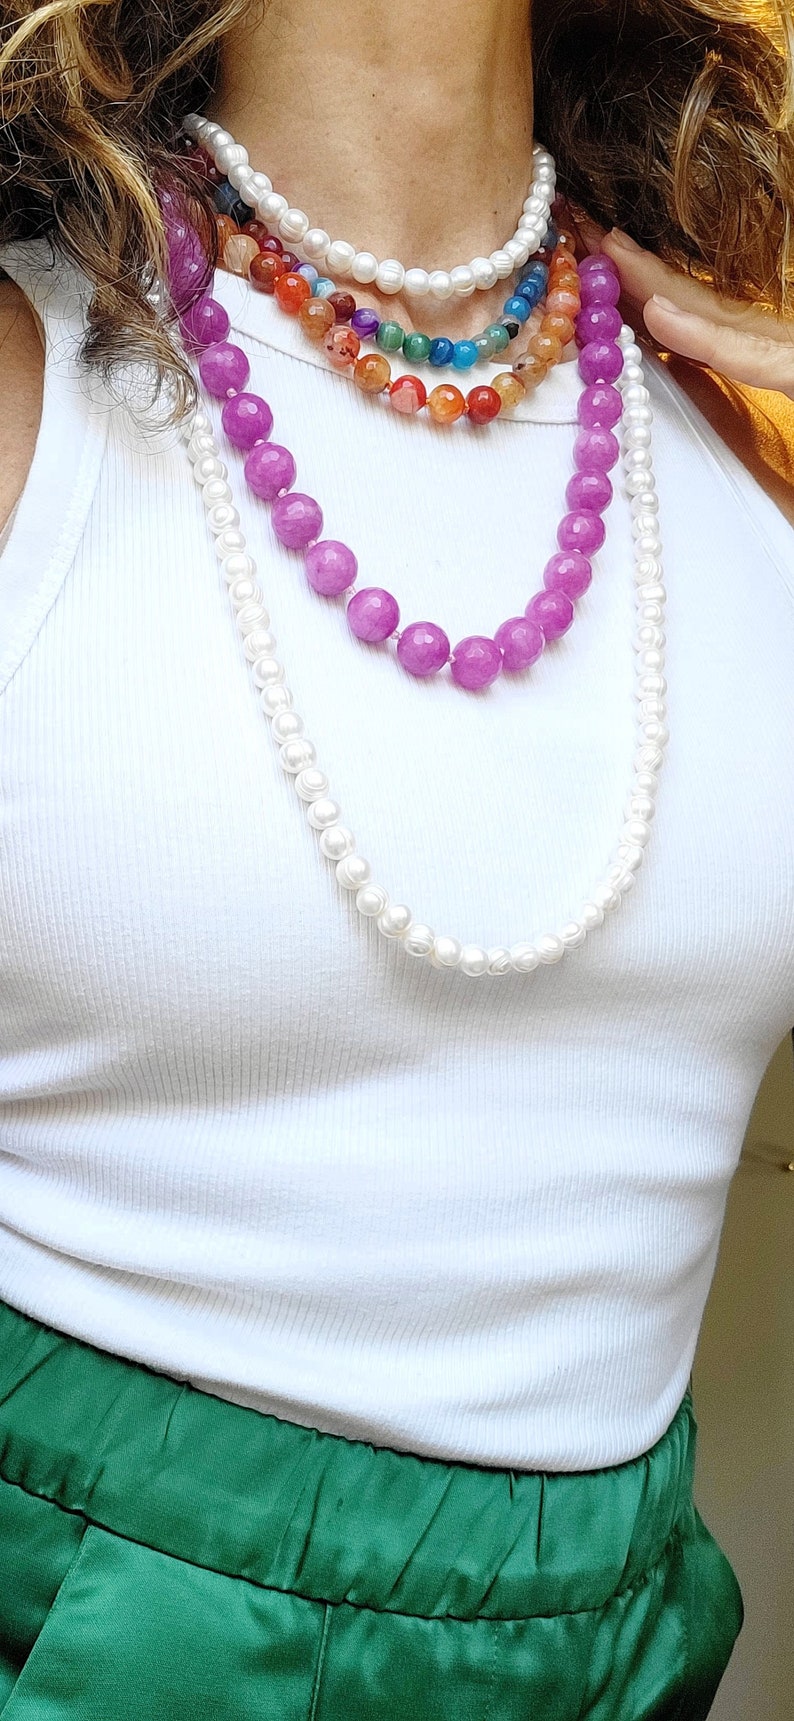 Pink agates necklace for women, necklace with precious natural stone beads, women's jewelry for weddings and communions, handmade jewelry image 3